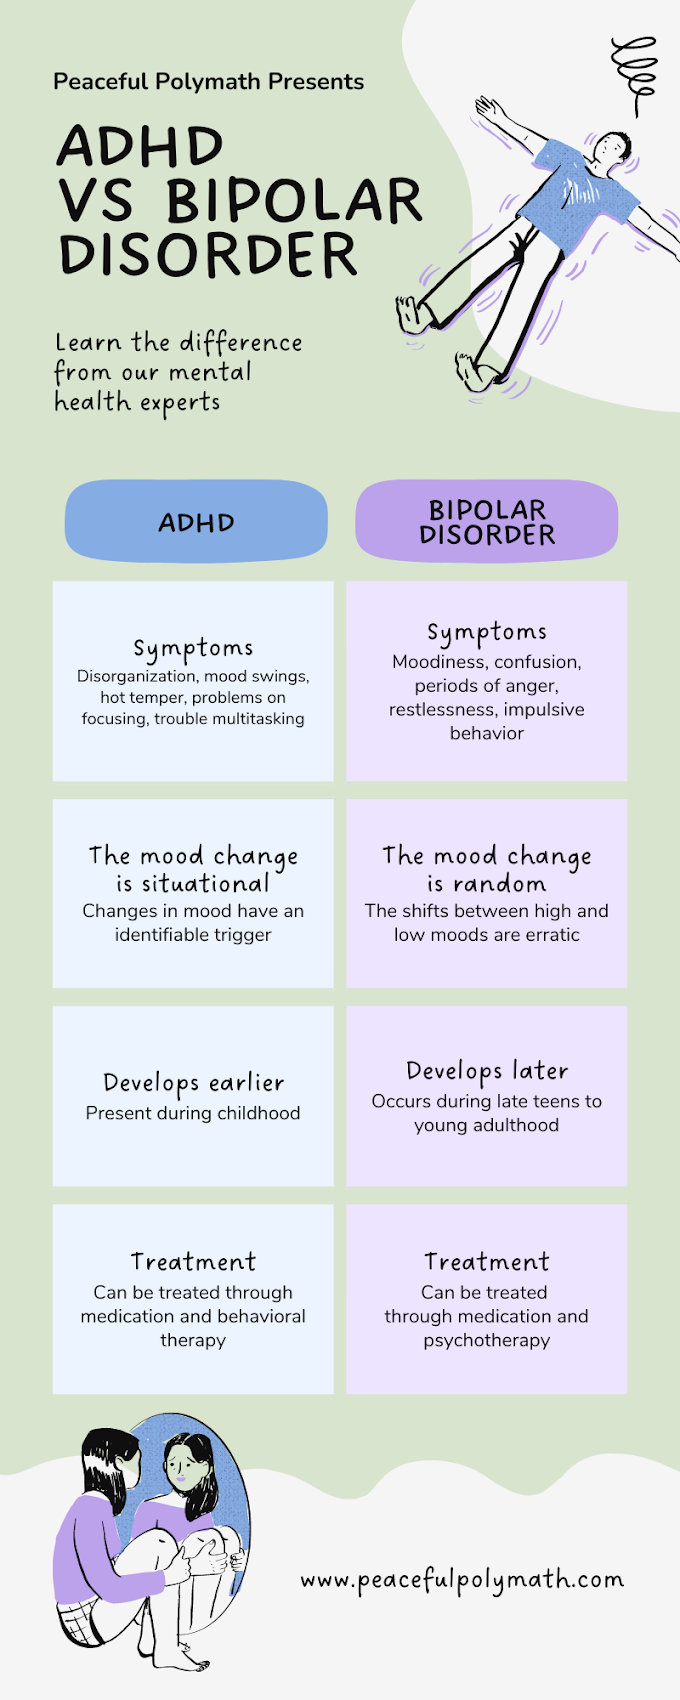 ADHD BRAIN DIFFERENCES